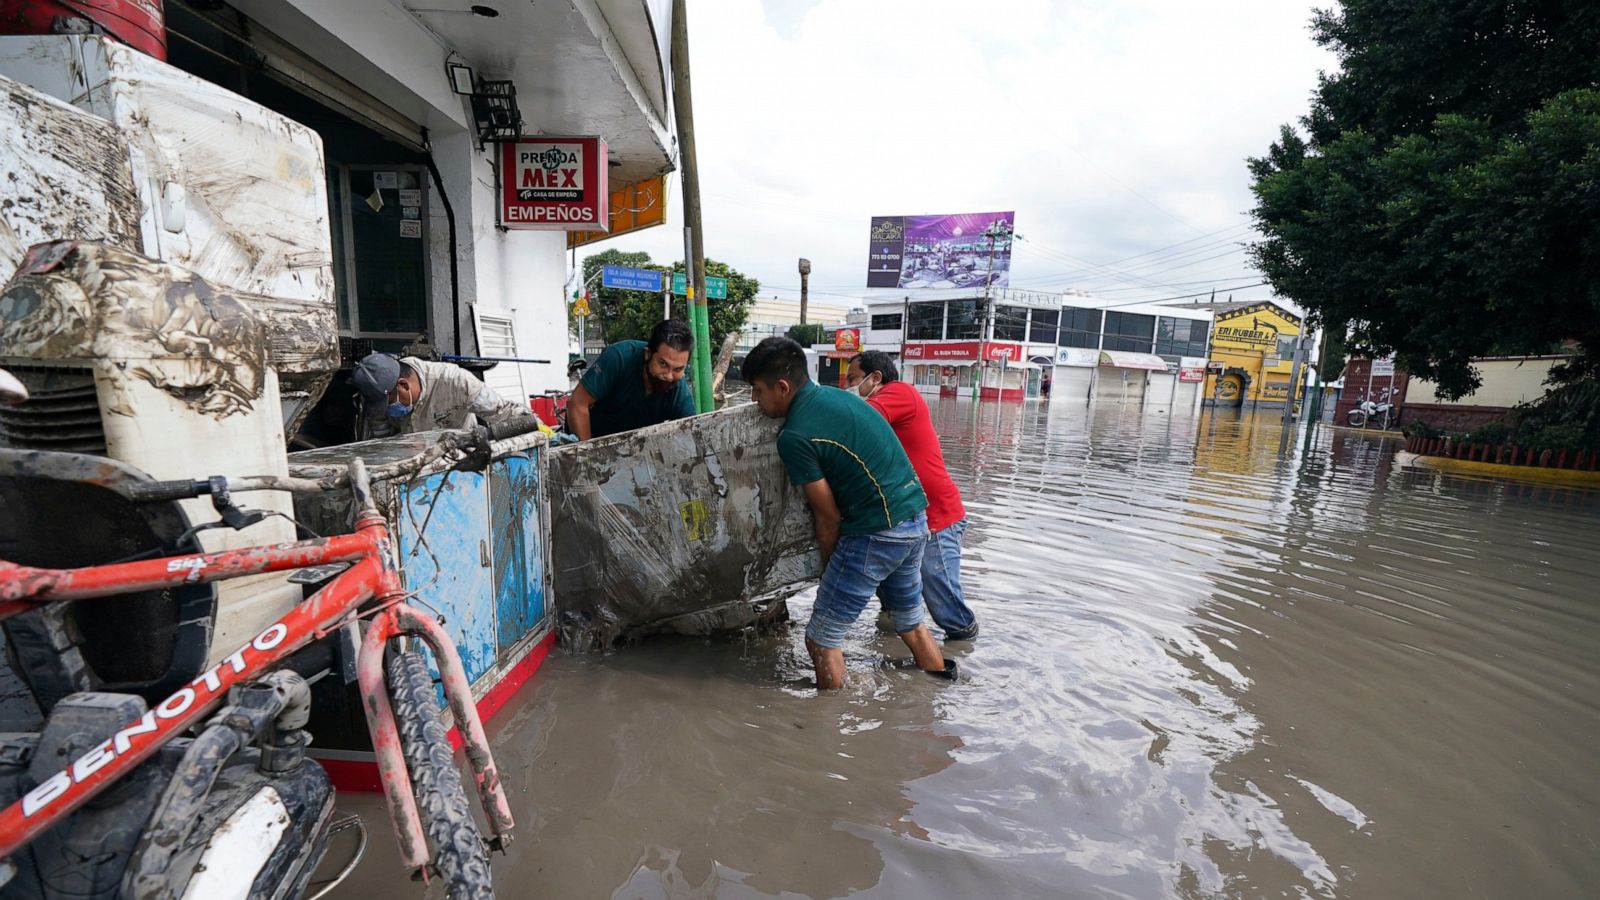 Flooding north of Mexico City leaves streets submerged - ABC News